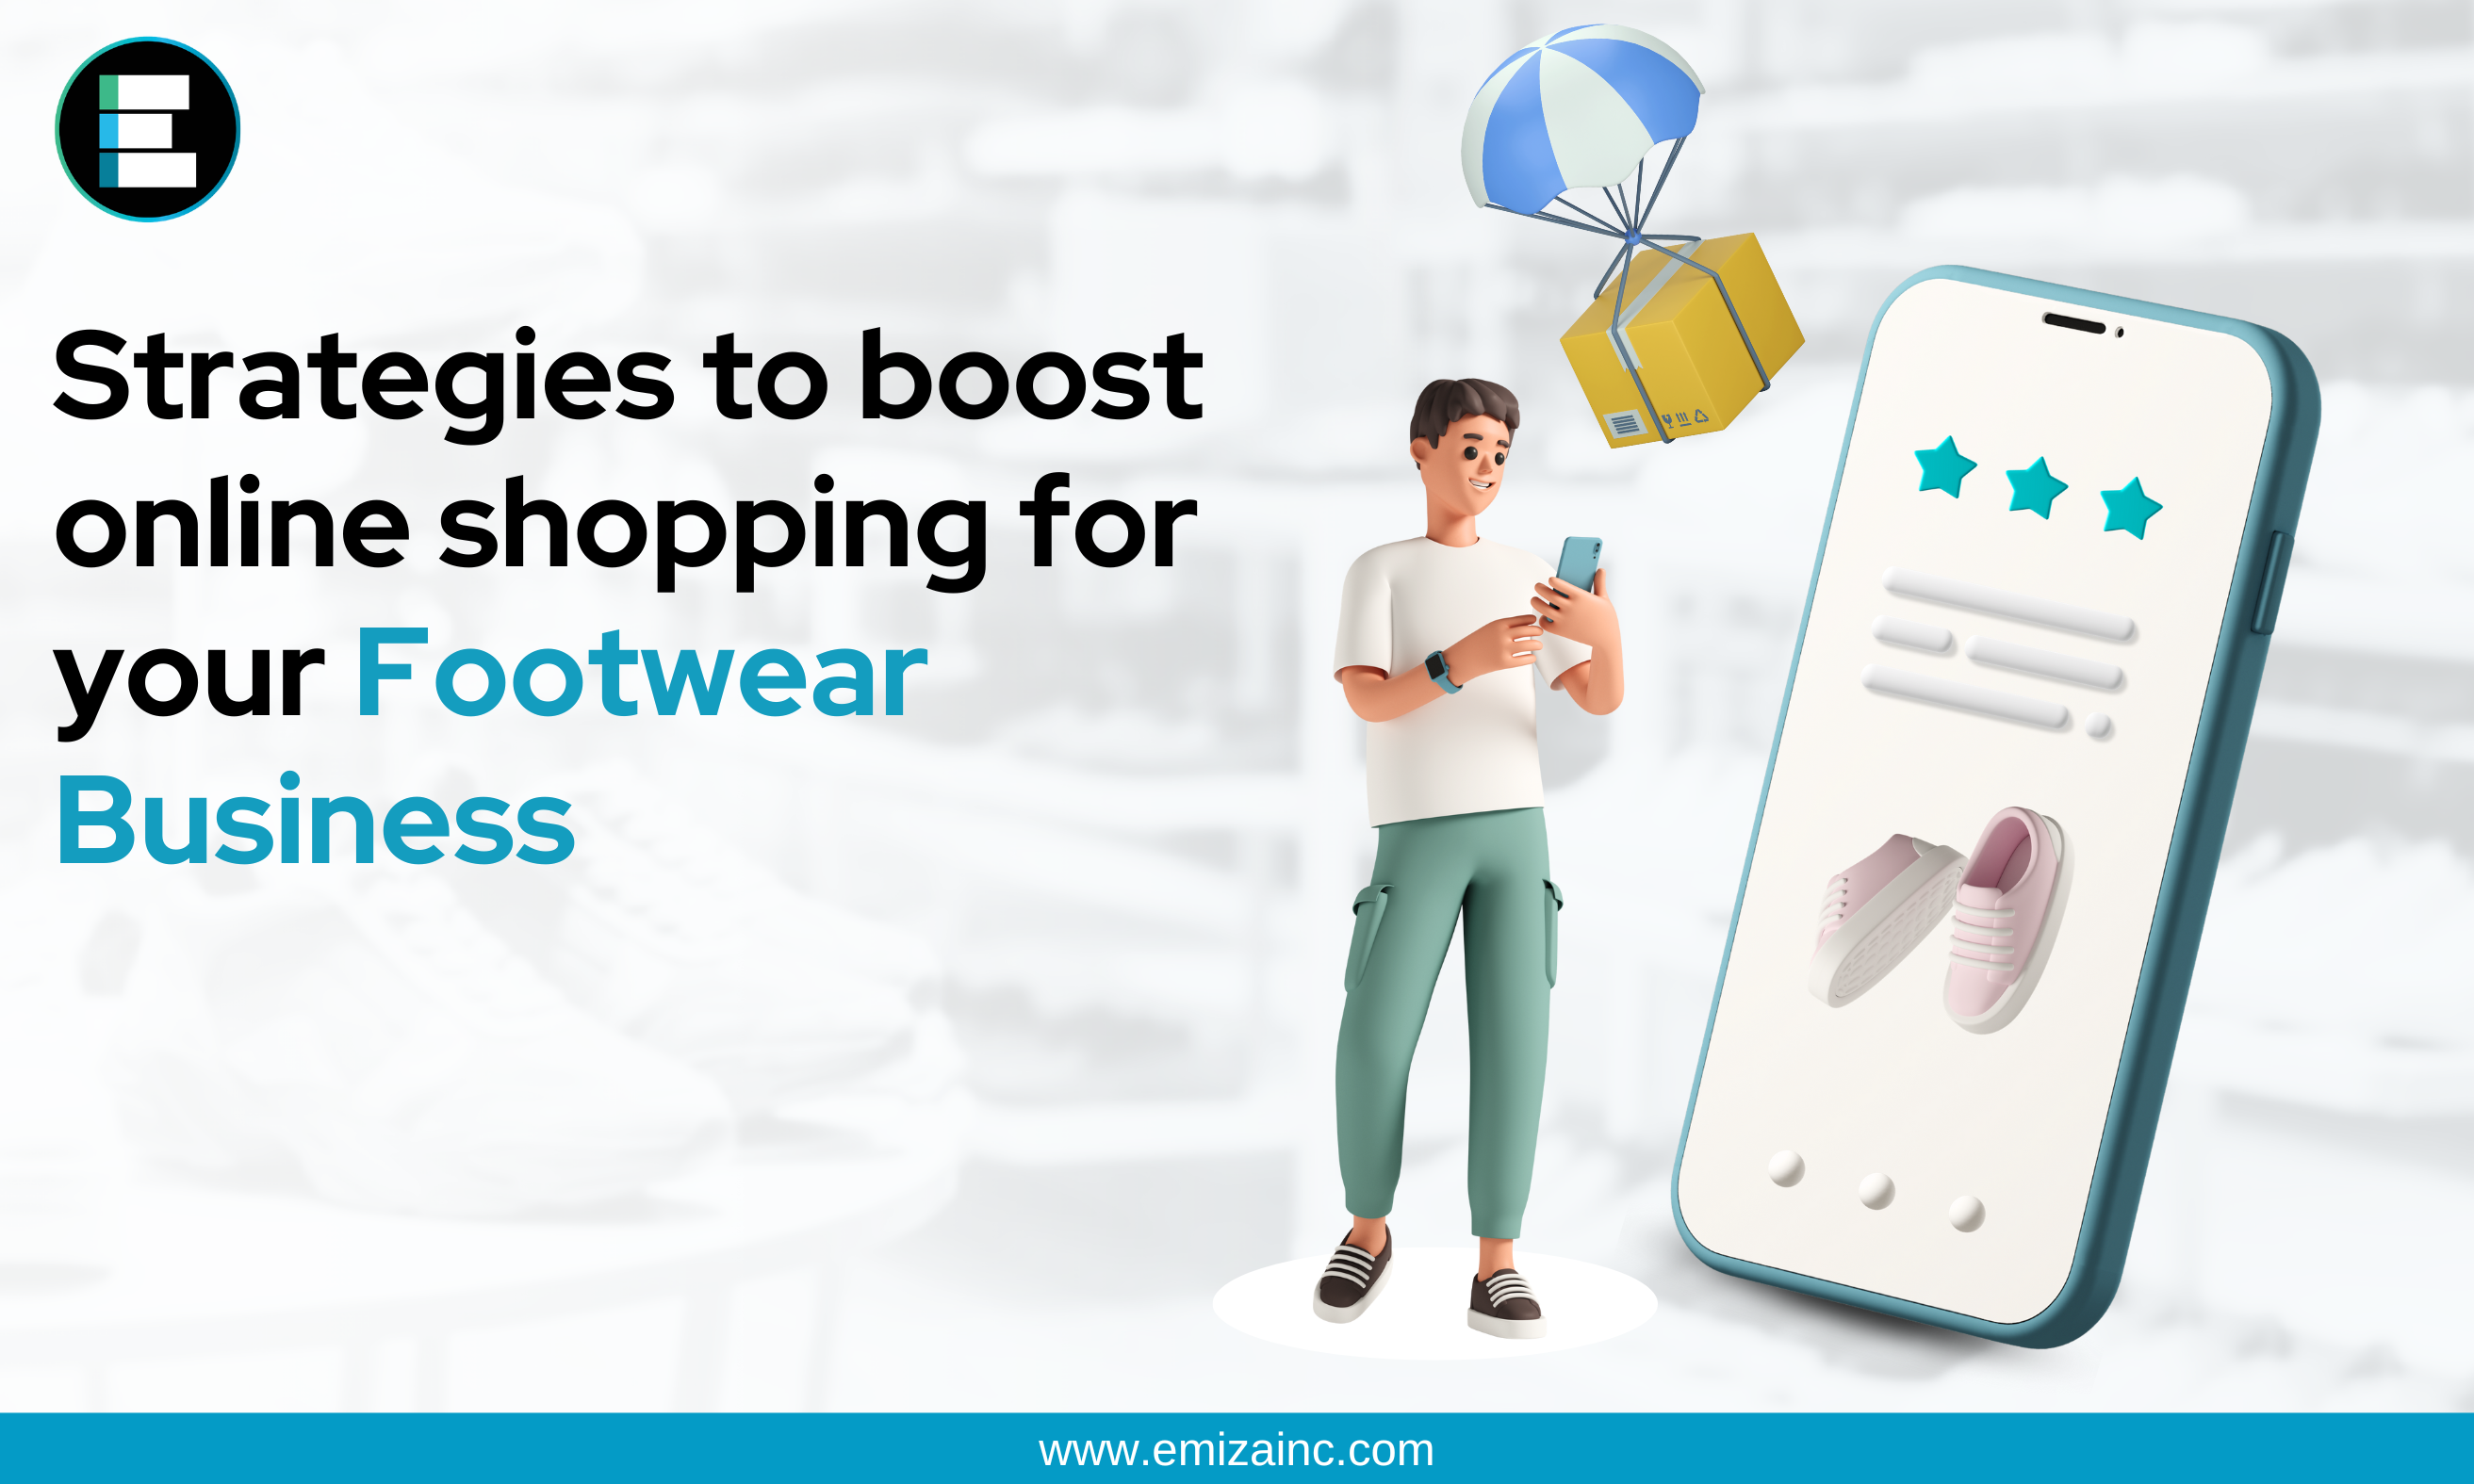 Strategies that will boost online shopping for the Footwear business